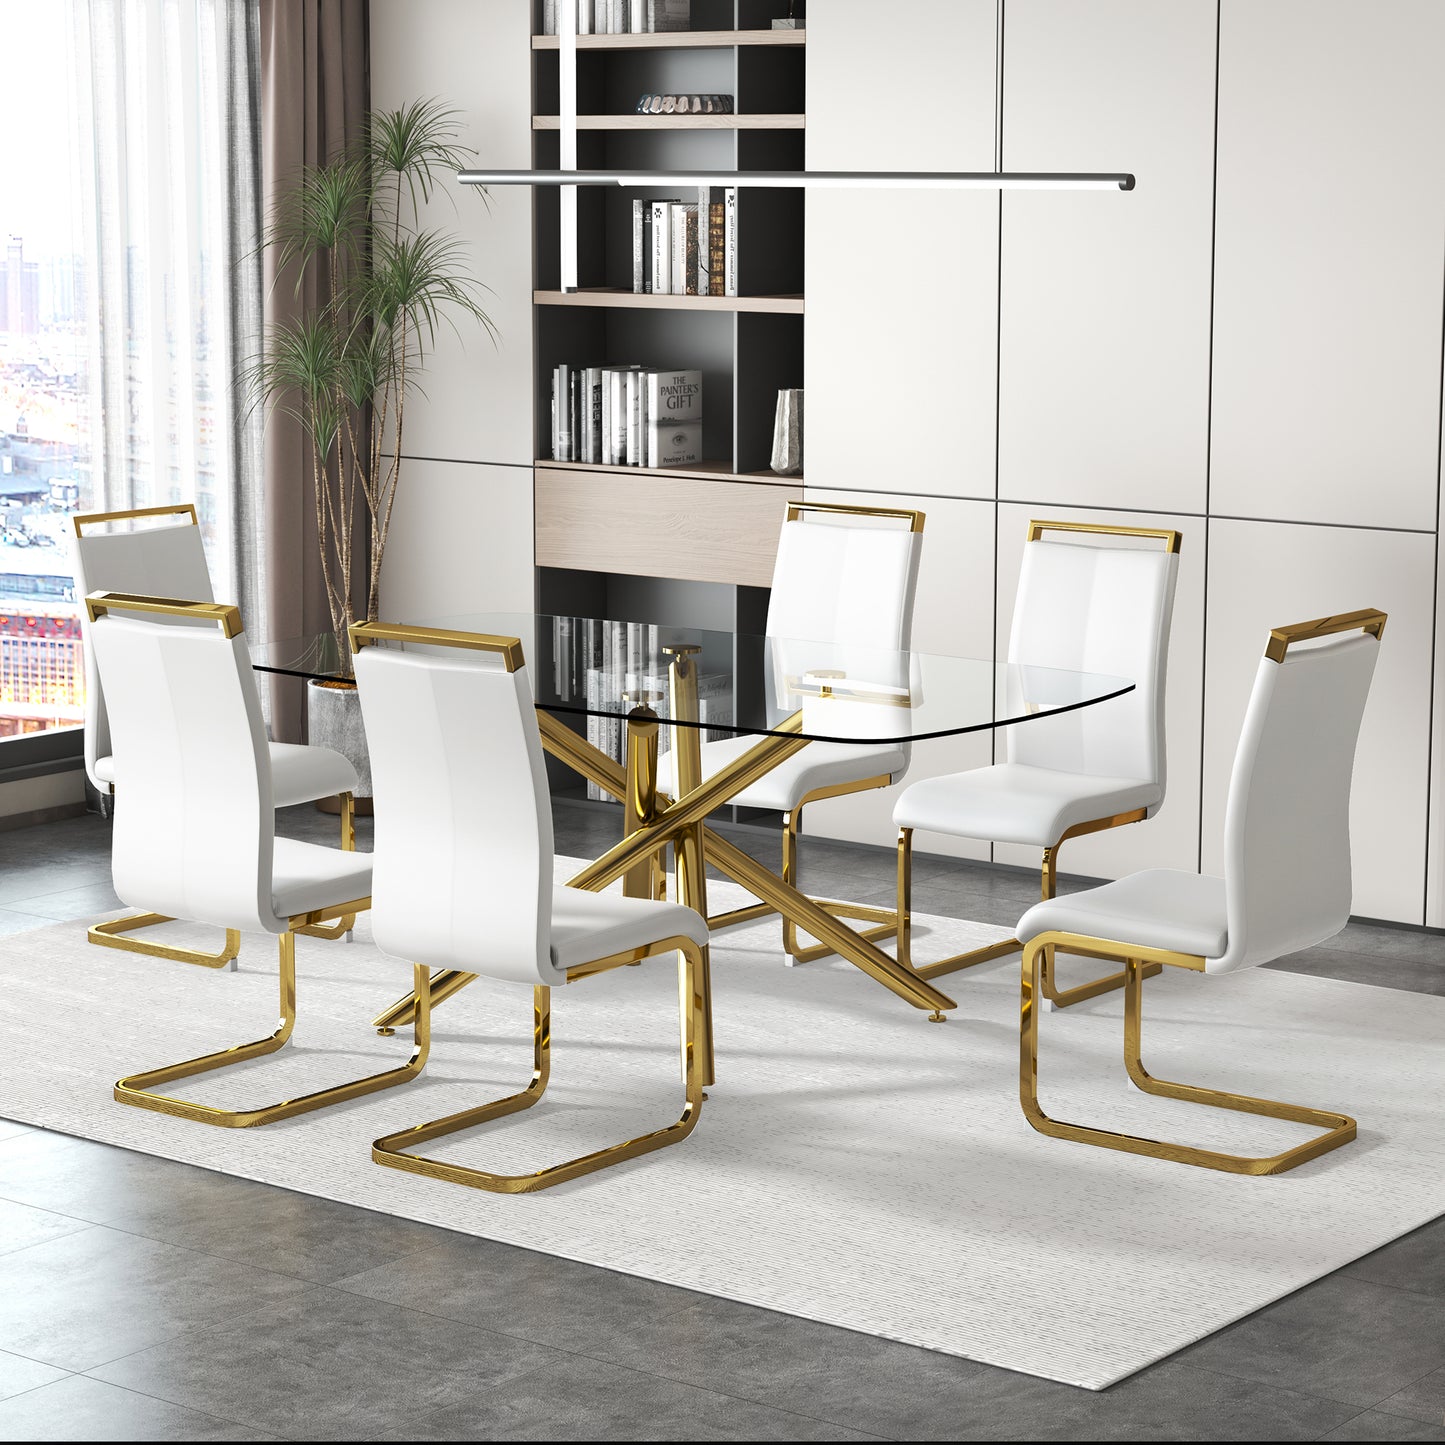 Large Modern Minimalist Rectangular Glass Dining Table for 6-8 with 0.39" Tempered Glass Tabletop and Golden Plated Metal Legs, for Kitchen Dining Living Meeting Room Banquet hall, 71'' x 39'' x30''